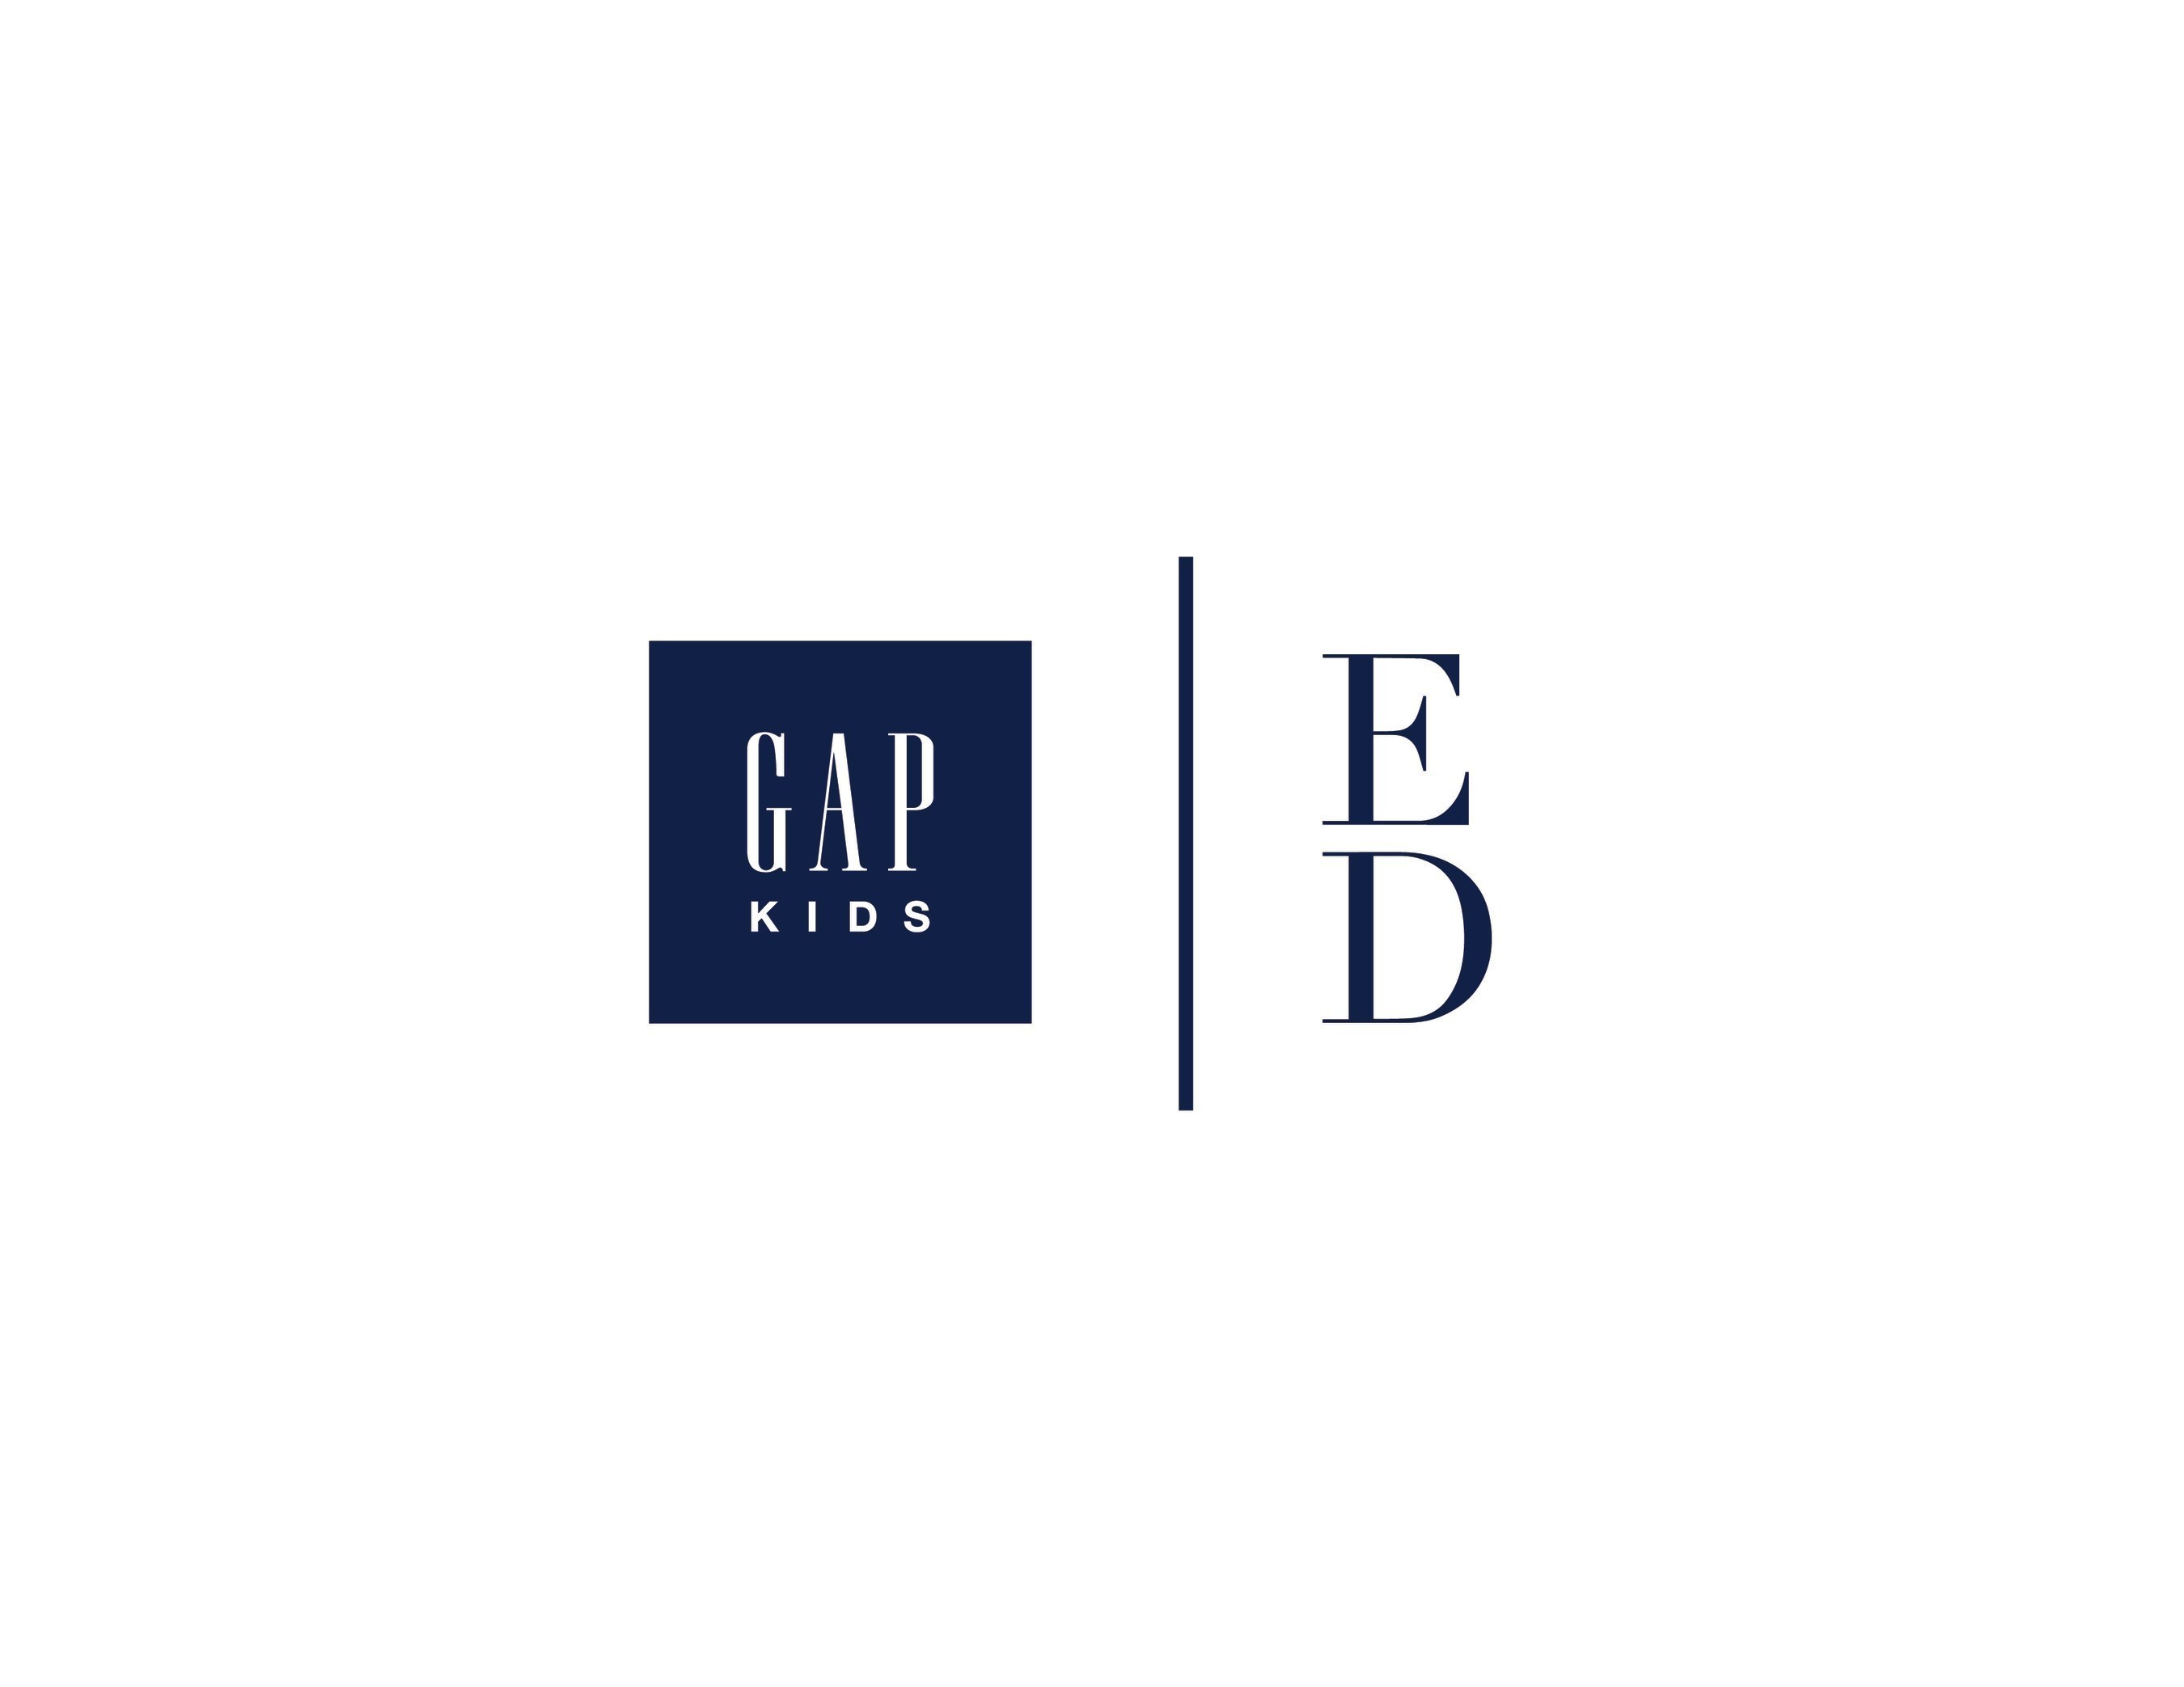 Gap partners with America's ambassador of individuality, Ellen DeGeneres, and her new lifestyle brand, ED, to celebrate girls being their own heroes